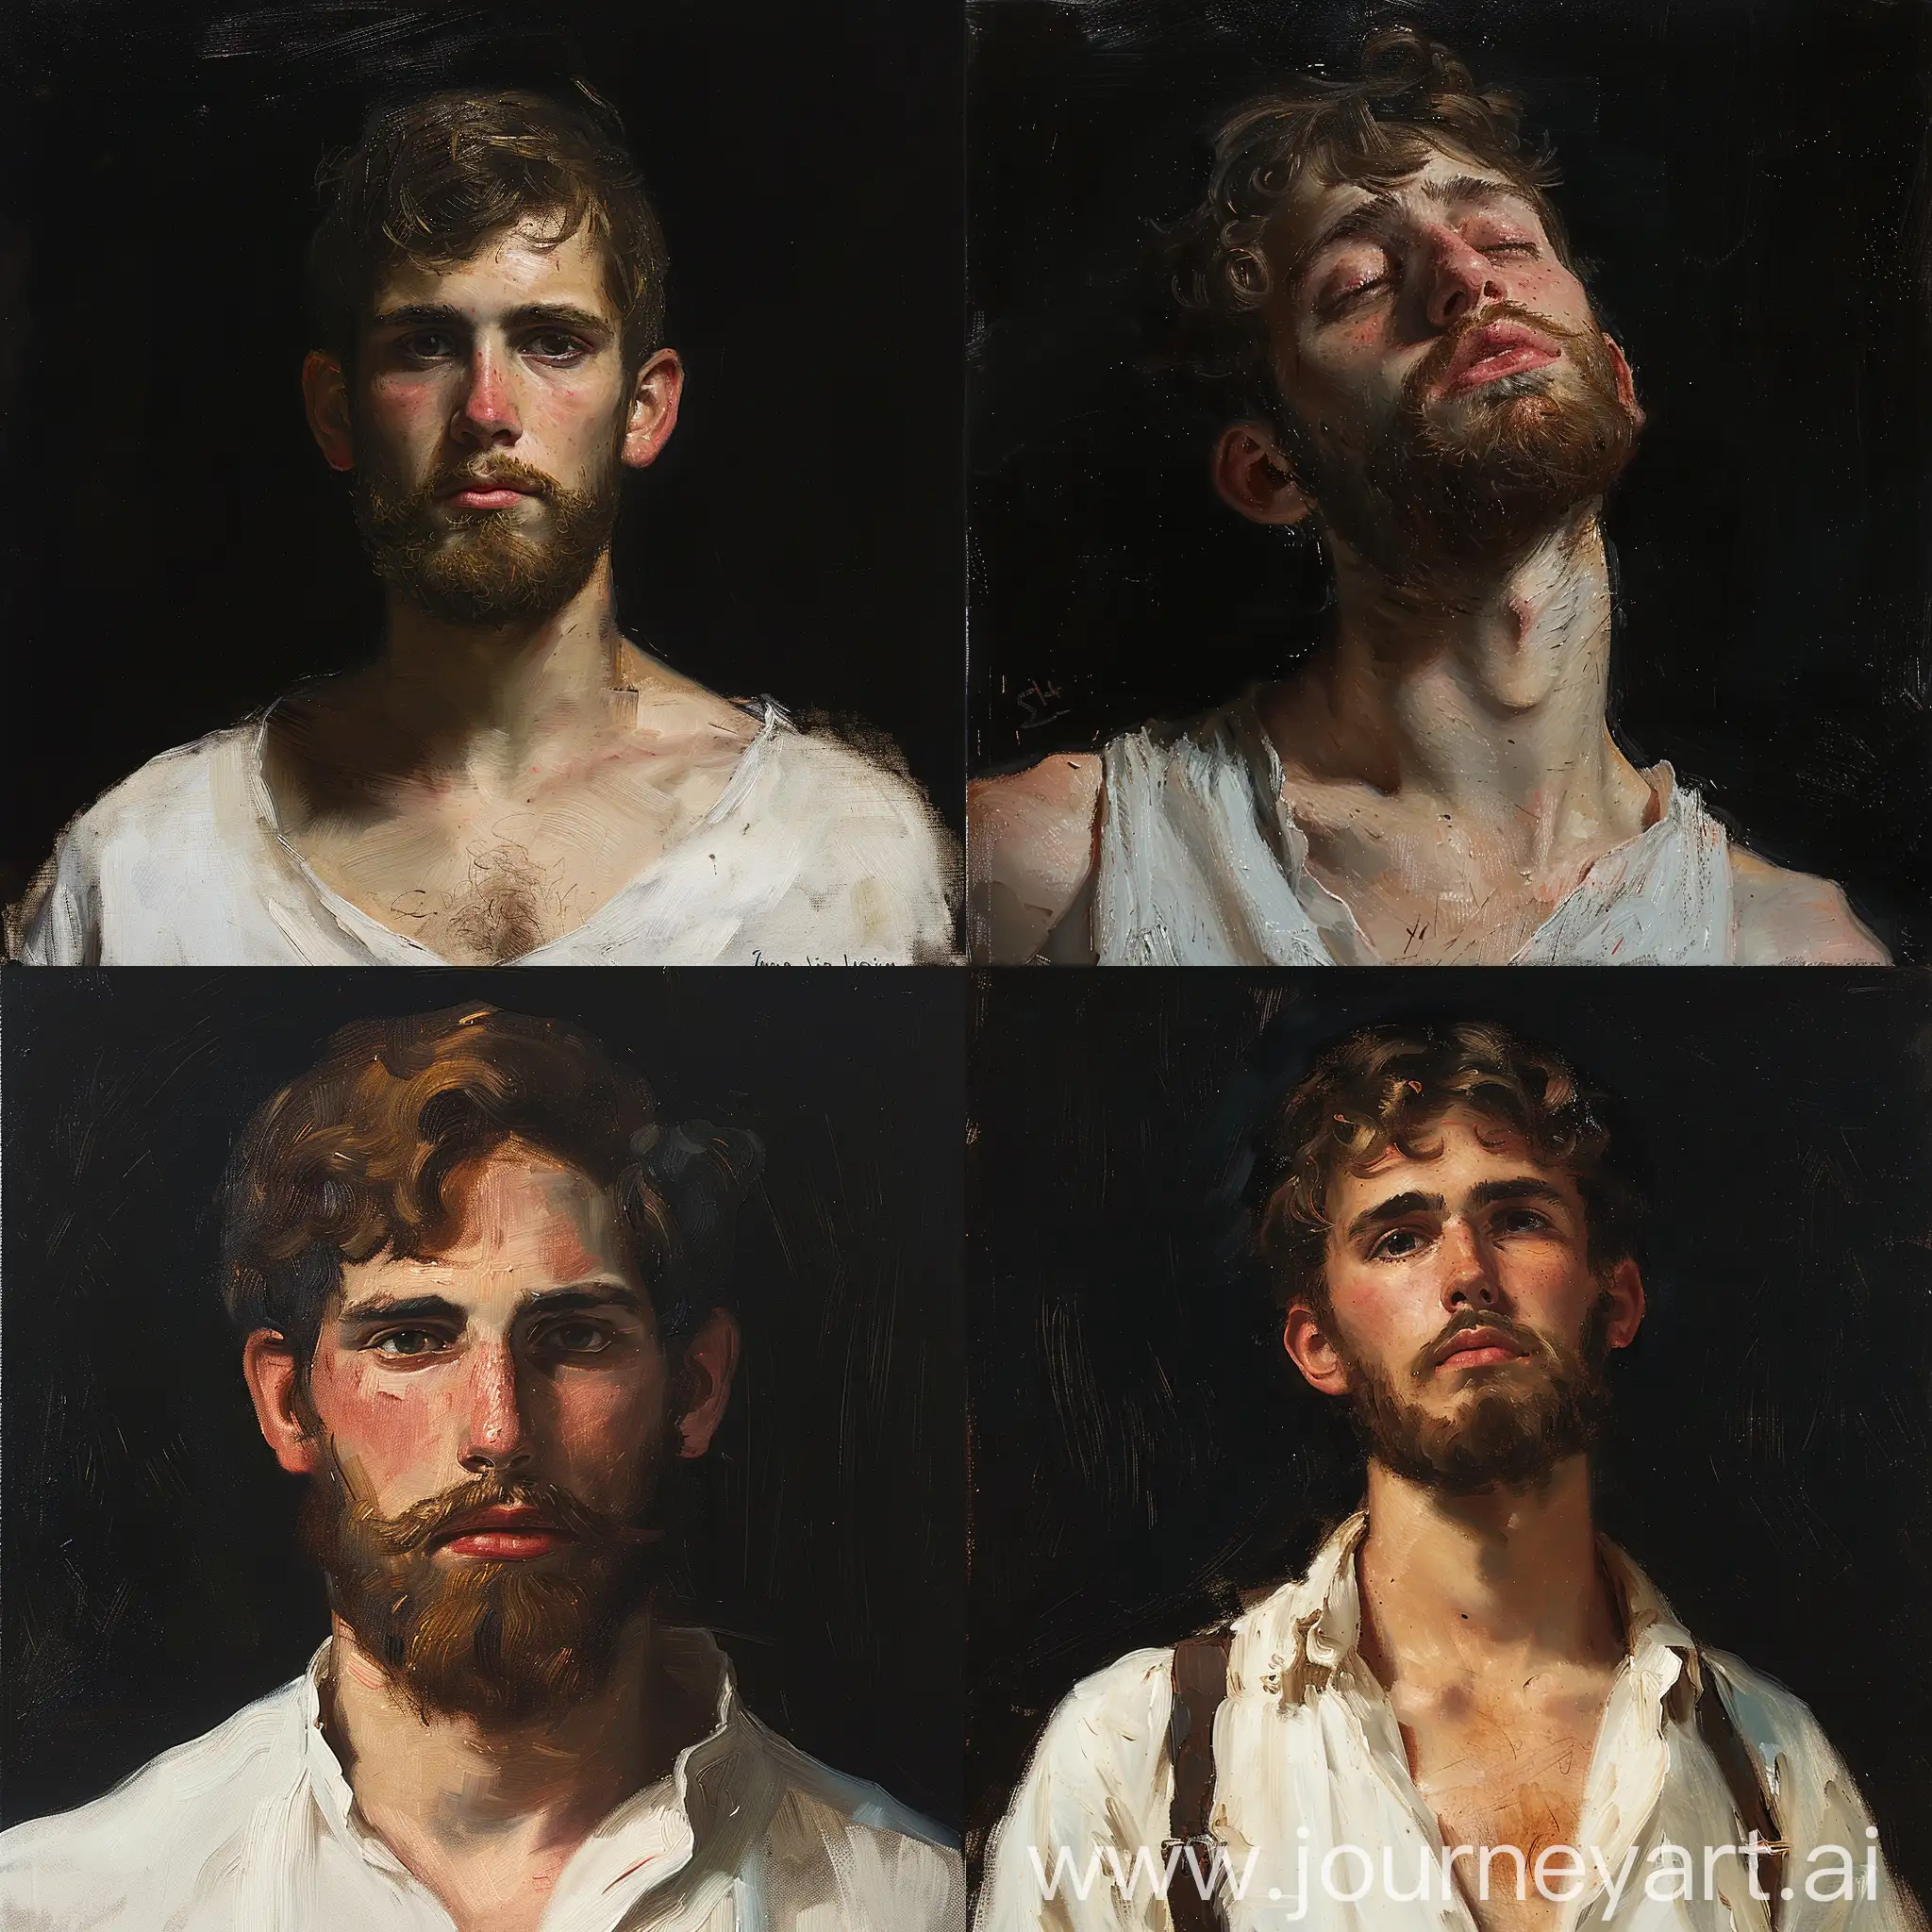 Oil sketch of a young man with beard, wlop John singer Sargent, jeremy lipkin and rob rey, range murata jeremy lipking, John singer Sargent, black background, jeremy lipkin, lensculture portrait awards, casey baugh and james jean, detailed realism in painting, award-winning portrait, amazingly detailed oil painting